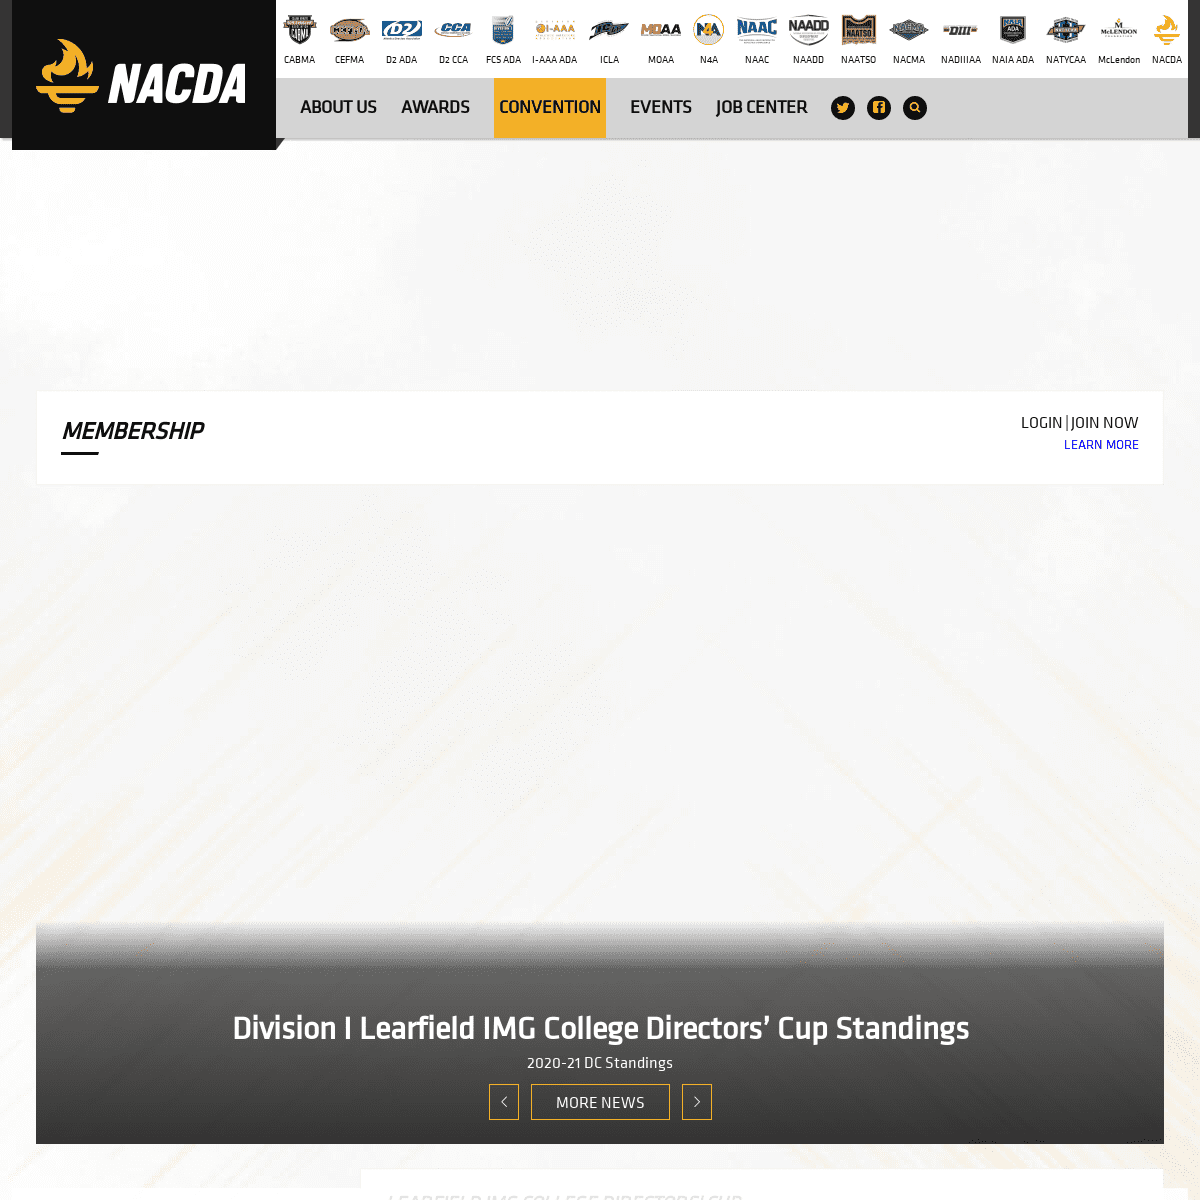 A complete backup of https://nacda.com